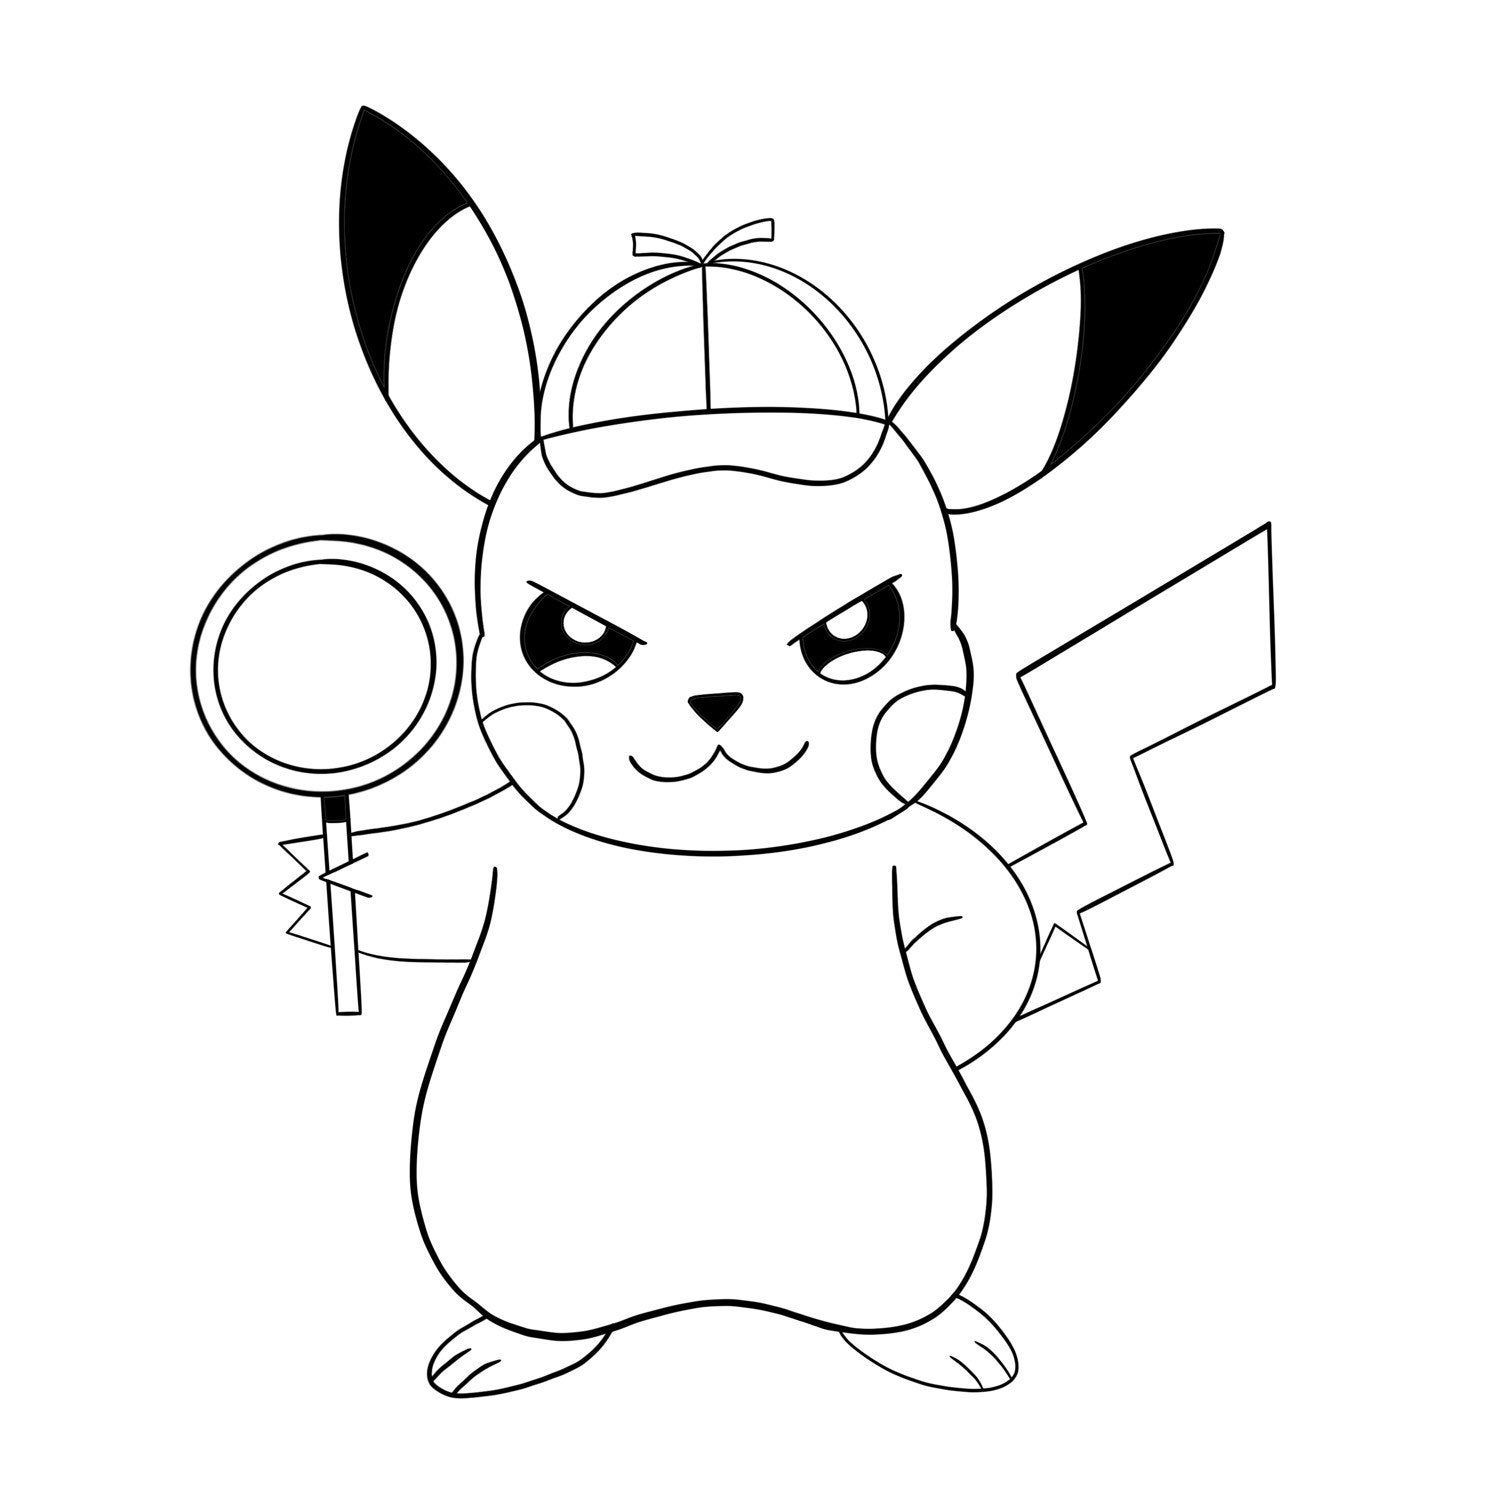 Pika New Art In My Shop Pokemon Litten Coloring Page coloring pages algebra  1 questions fun 7th grade math activities cool math games pacman adding  fractions and decimals worksheet math vocab I